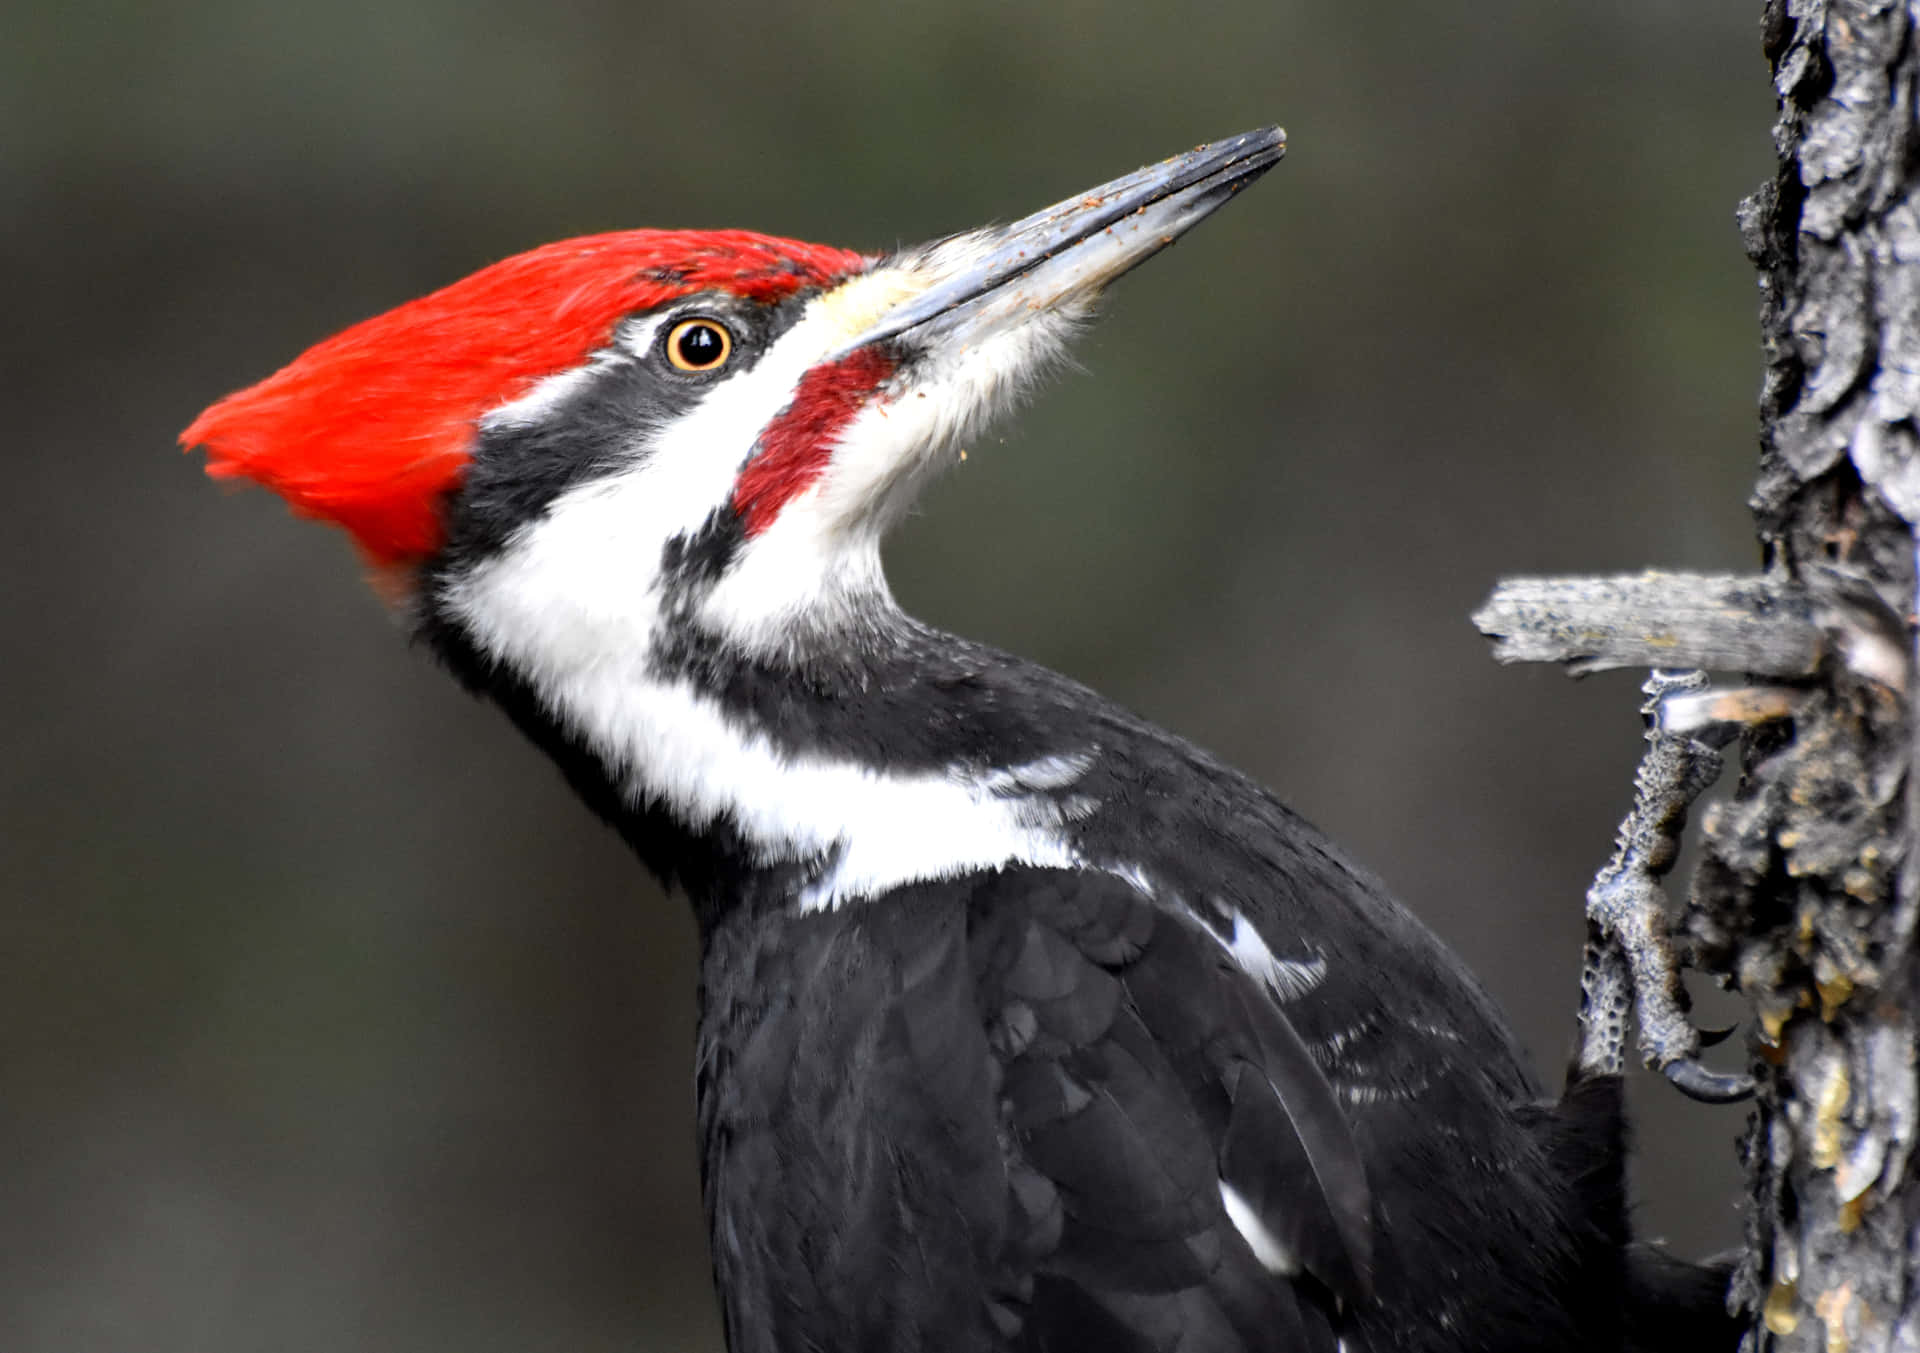 Look at the Curious Red-Headed Woodpecker